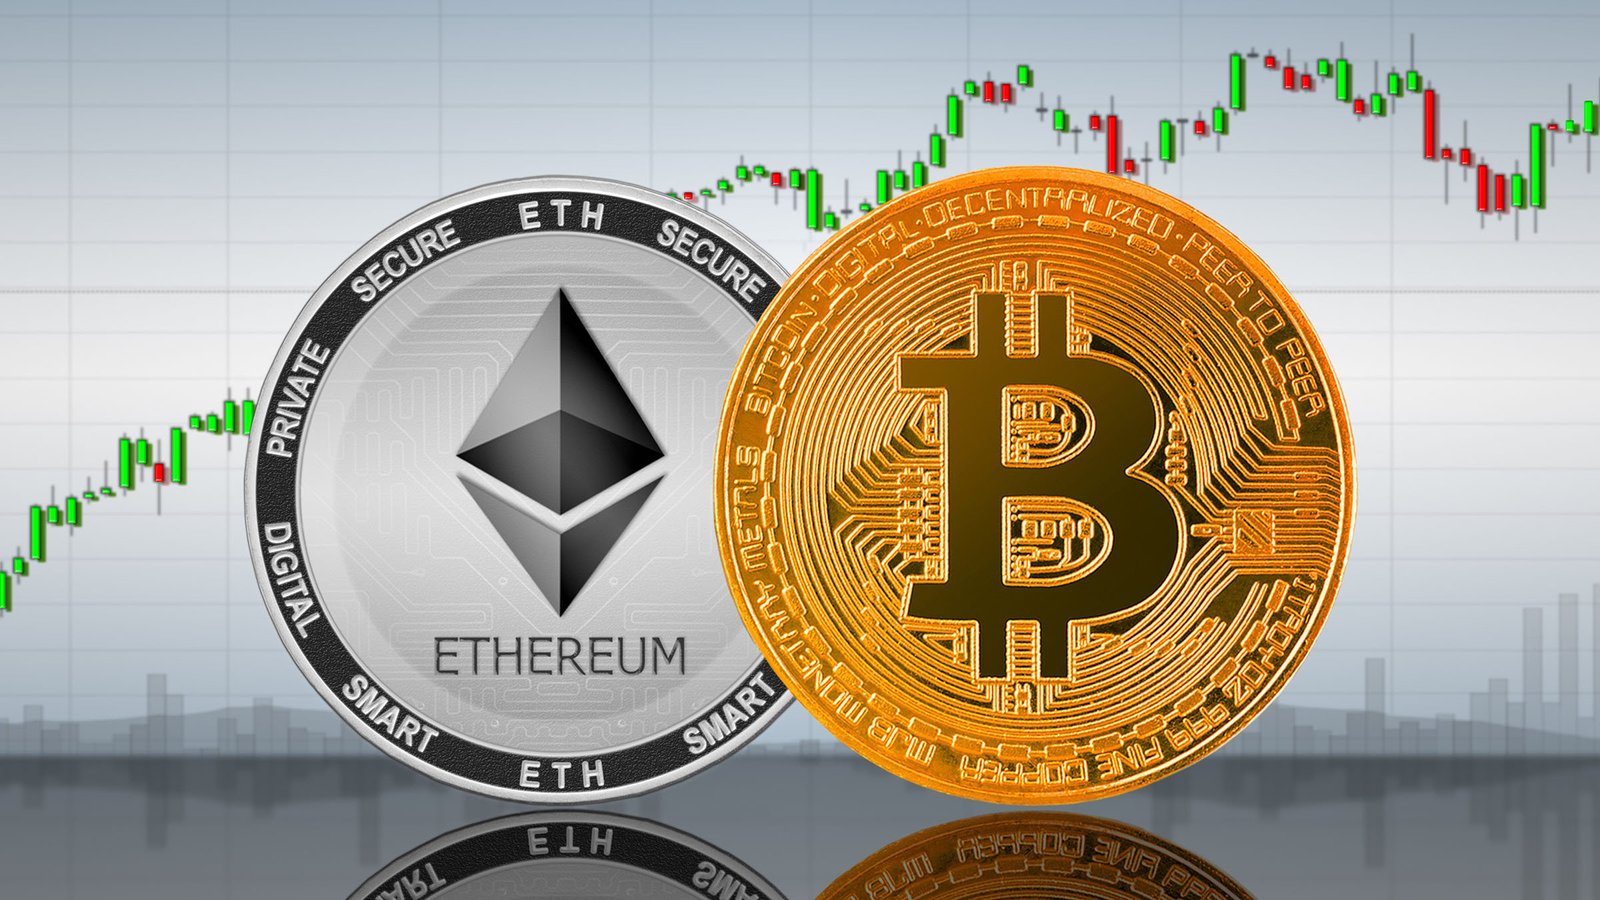 How Bitcoin Can Grow by Adopting Ethereum's Methods